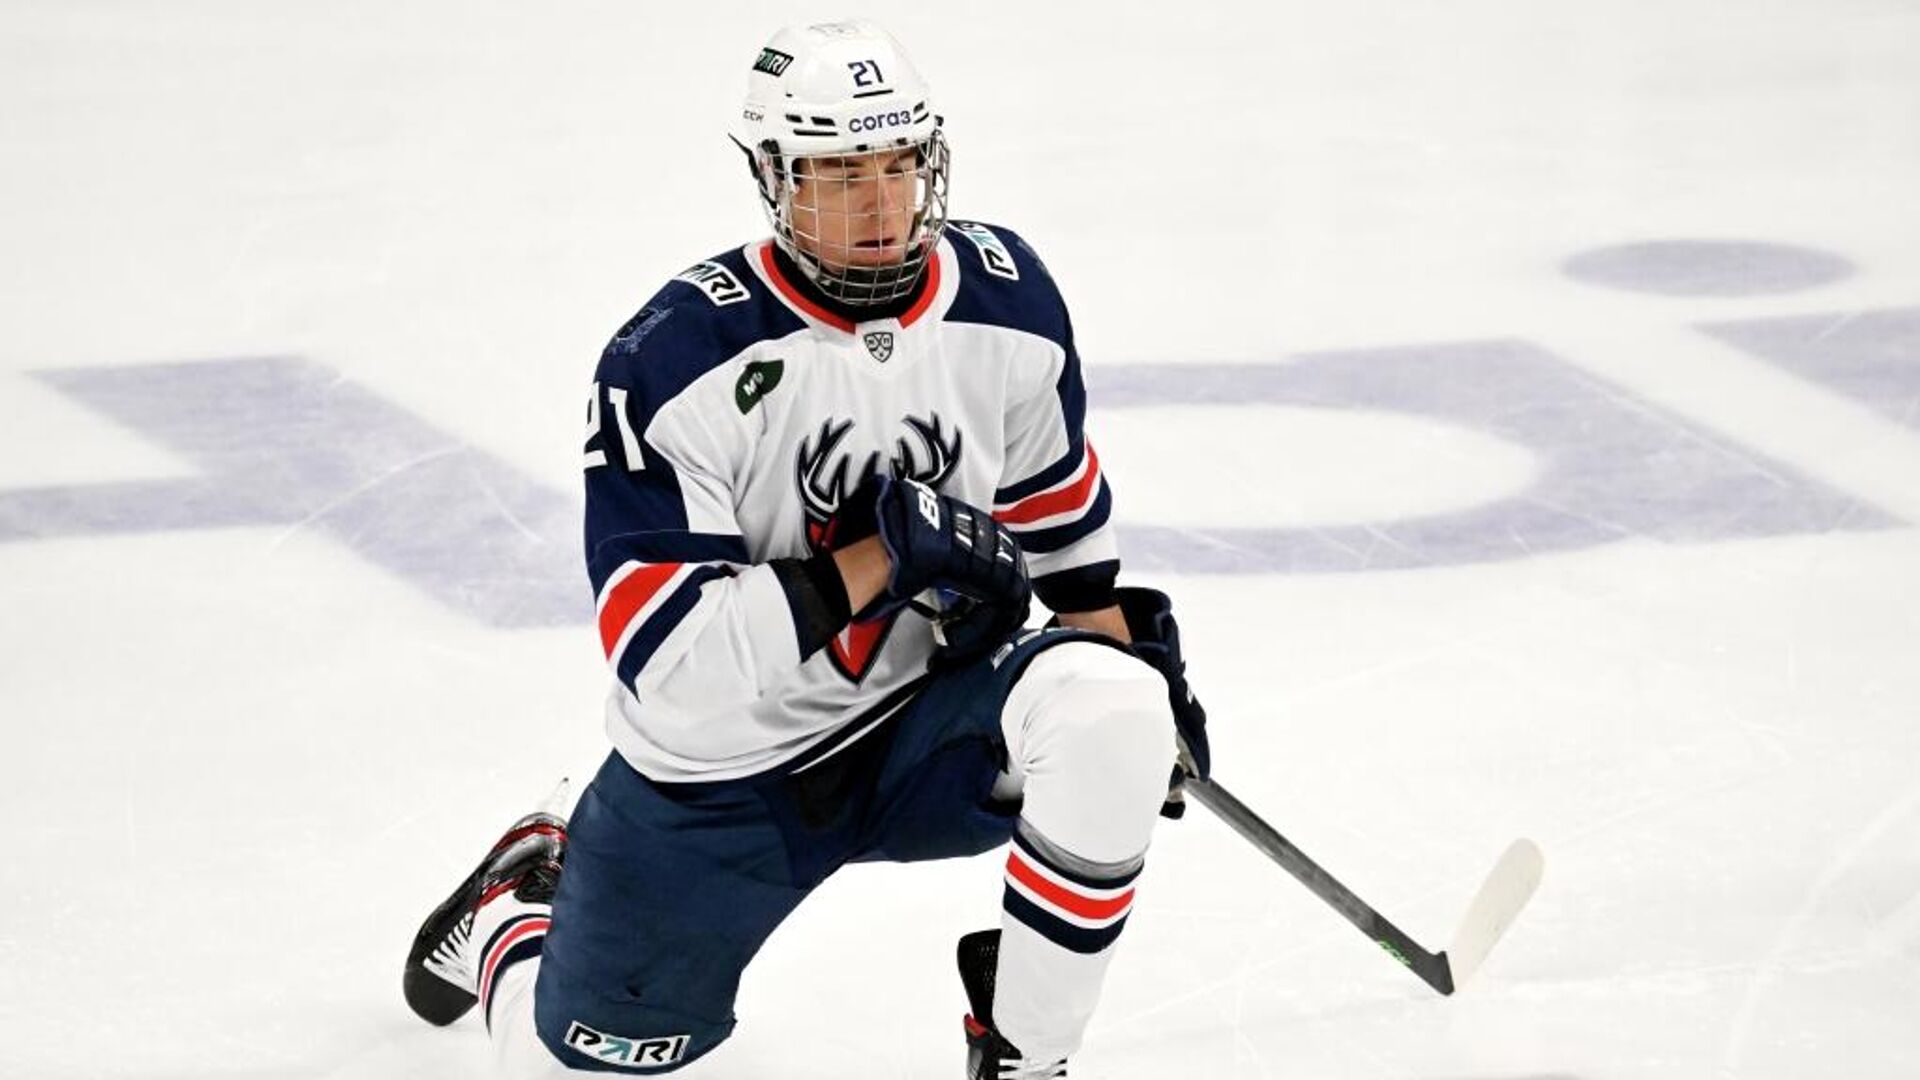 The Athletic includes the Torpedo defenseman in the top 3 of the upcoming NHL draft